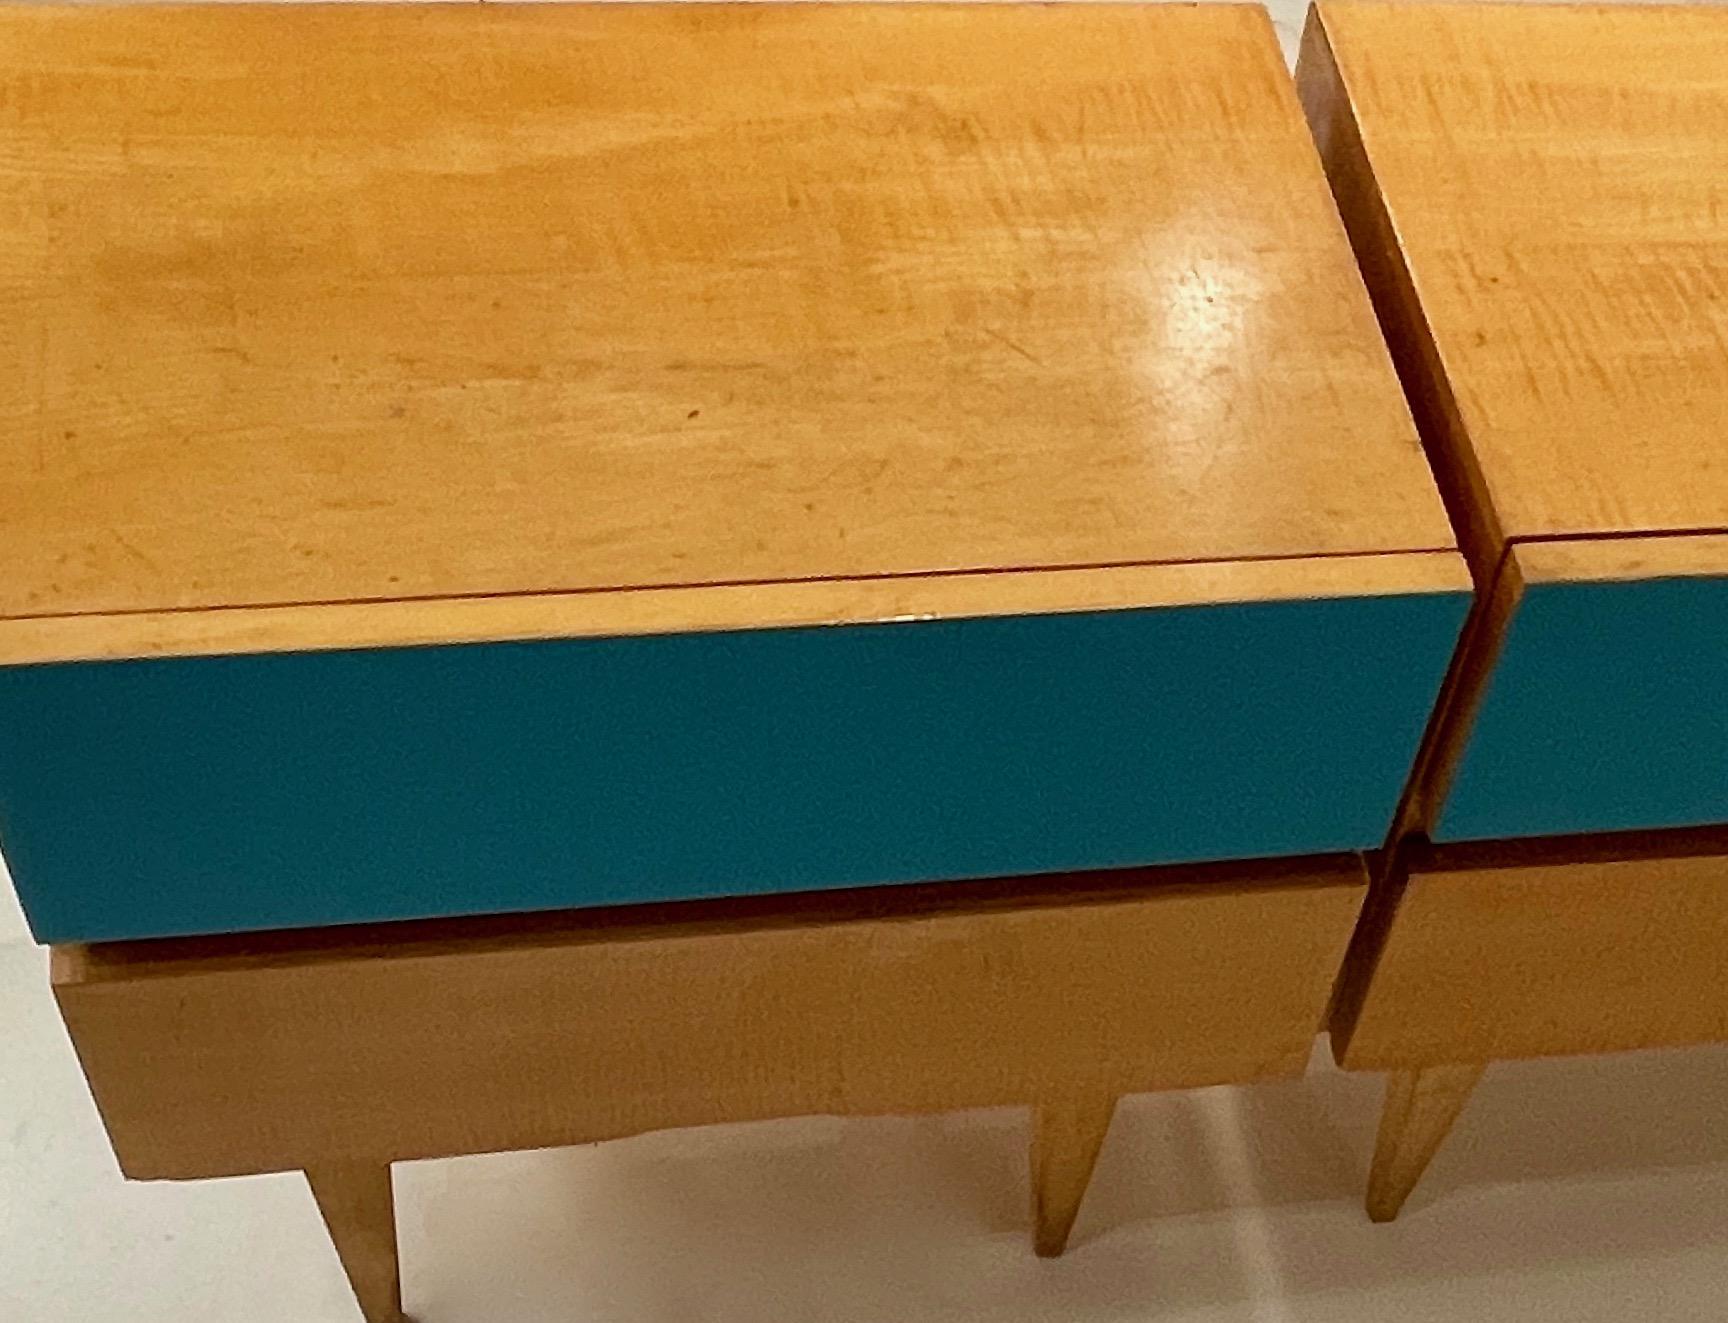 Modern-constructivist night stands or end tables.
Sycamore veneer with two drawers each ( one blue lacquer ).
In the style of Gio Ponti, Italy around 1950.